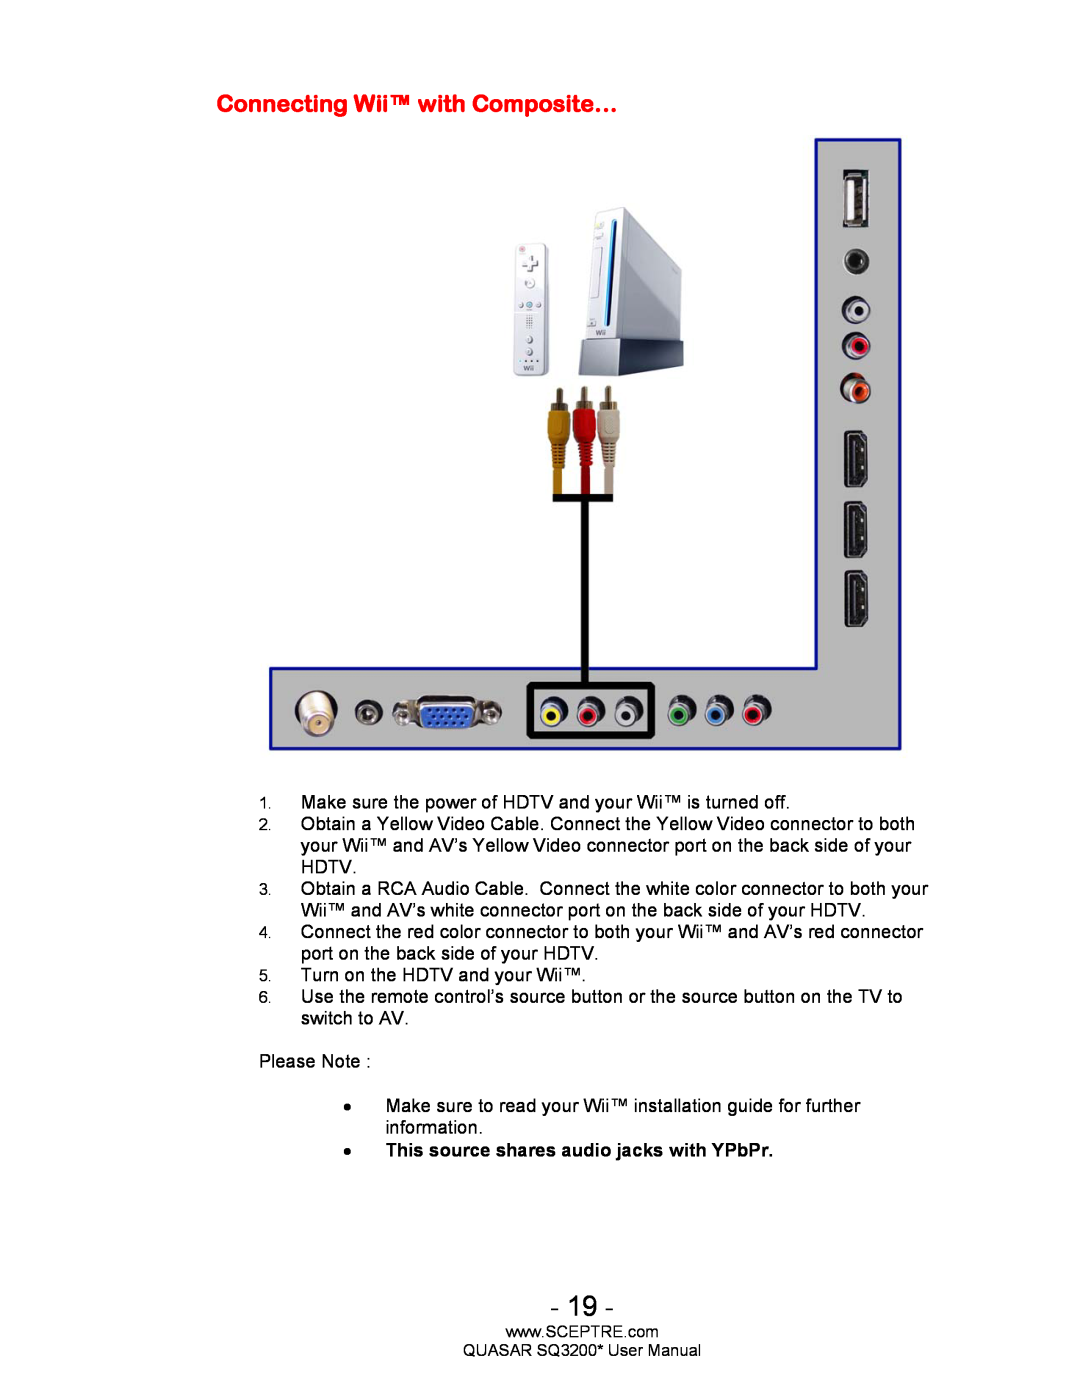 Sceptre Technologies SQ3200, HDTV user manual Connecting Wii with Composite…, This source shares audio jacks with YPbPr 